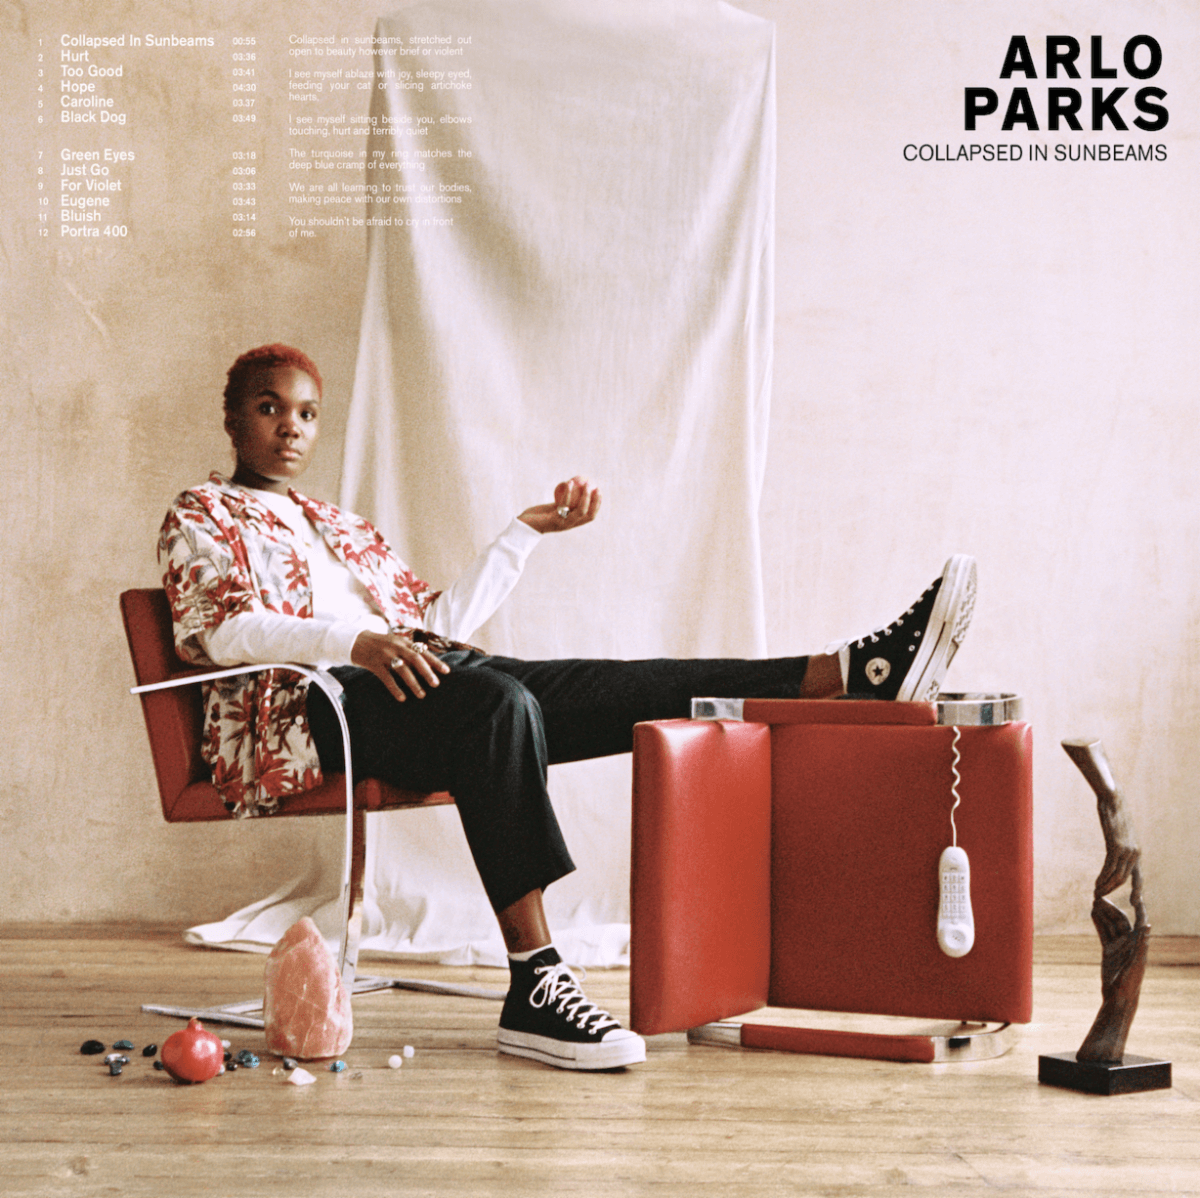 Collapsed In Sunbeams by Arlo Parks album review by Randy Randic for Northern Transmissions